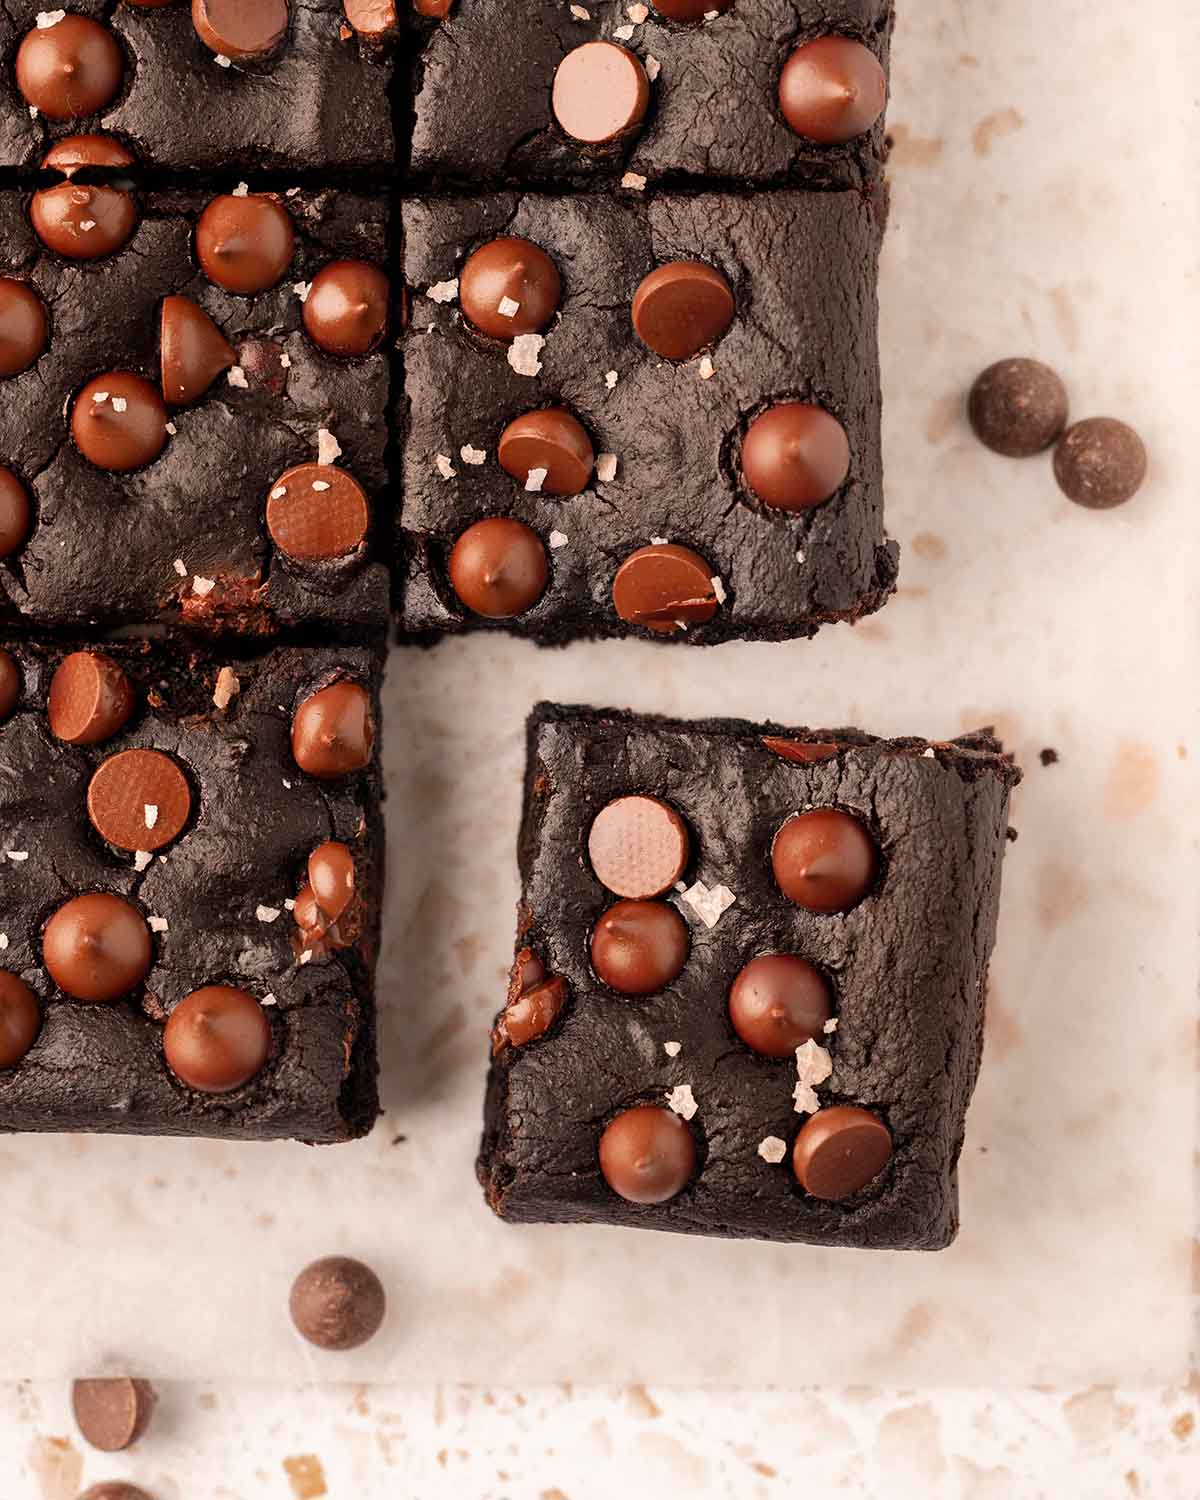 Black bean brownies with lots of chocolate chips. Brownies are on parchment paper with the corner brownie popping out.